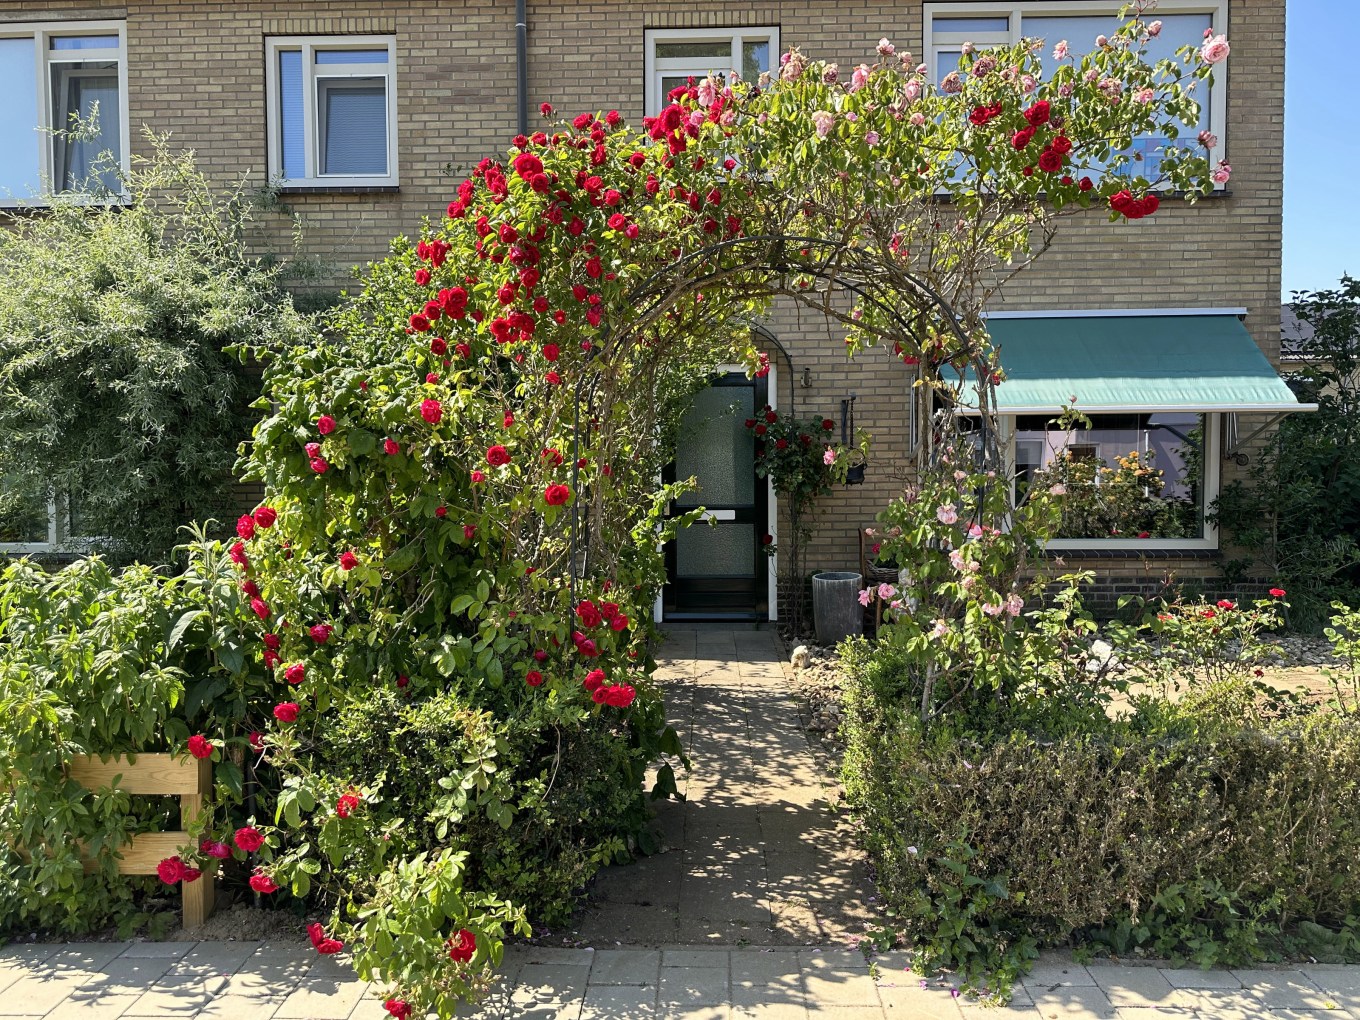 Romantic garden arch with red and pink climbing roses at the home entrance